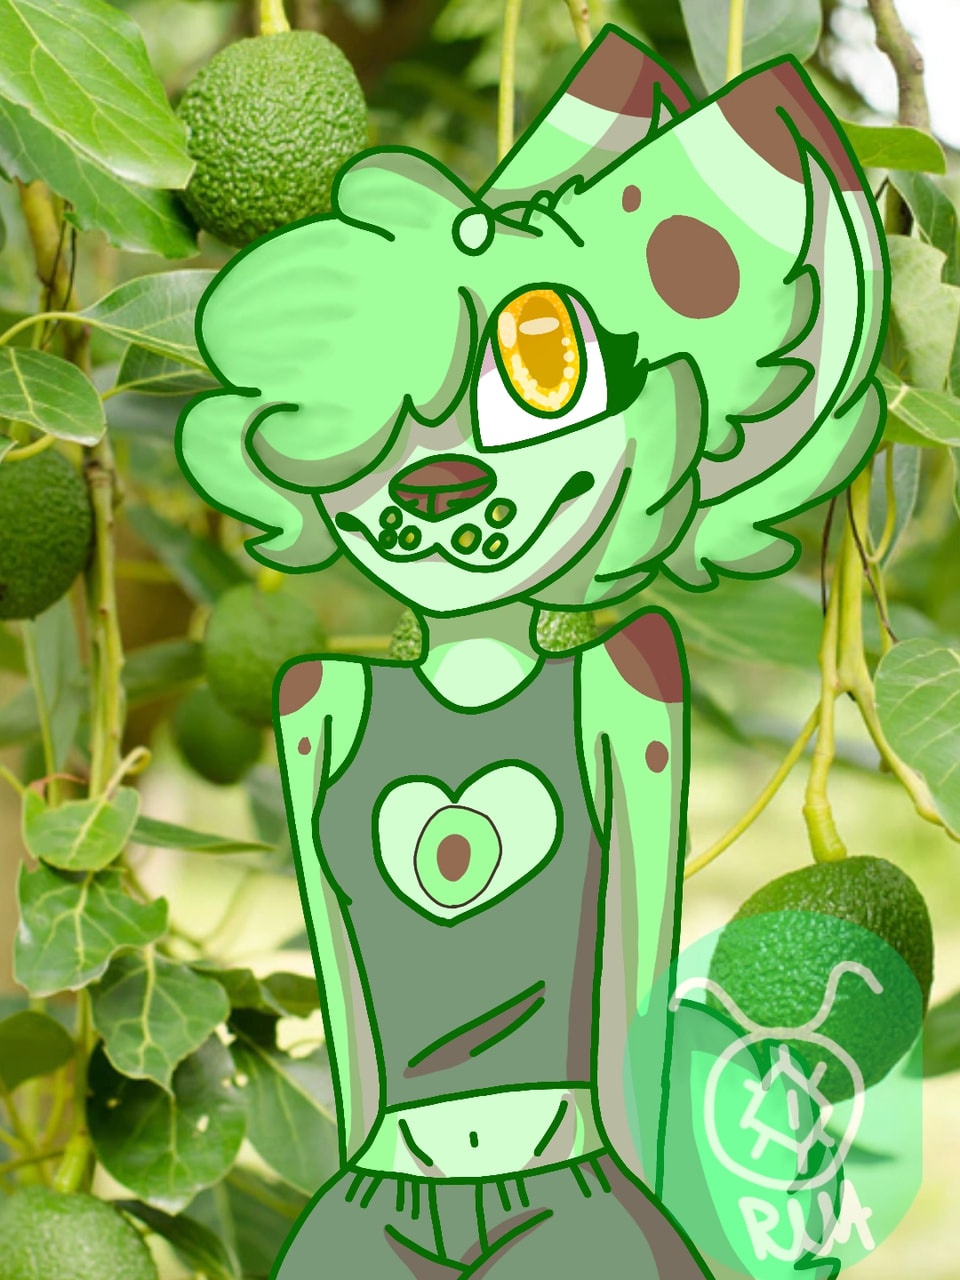 💚🥑Avocado🥑💚 wow look i posted an actual drawing :O. EDIT: OMG! Thanks for All the Likes, I'm legit shaking of happines rigth now! #foodchallenge #fridayswithsketch #FurryOC #oc #ocdesign #avocado